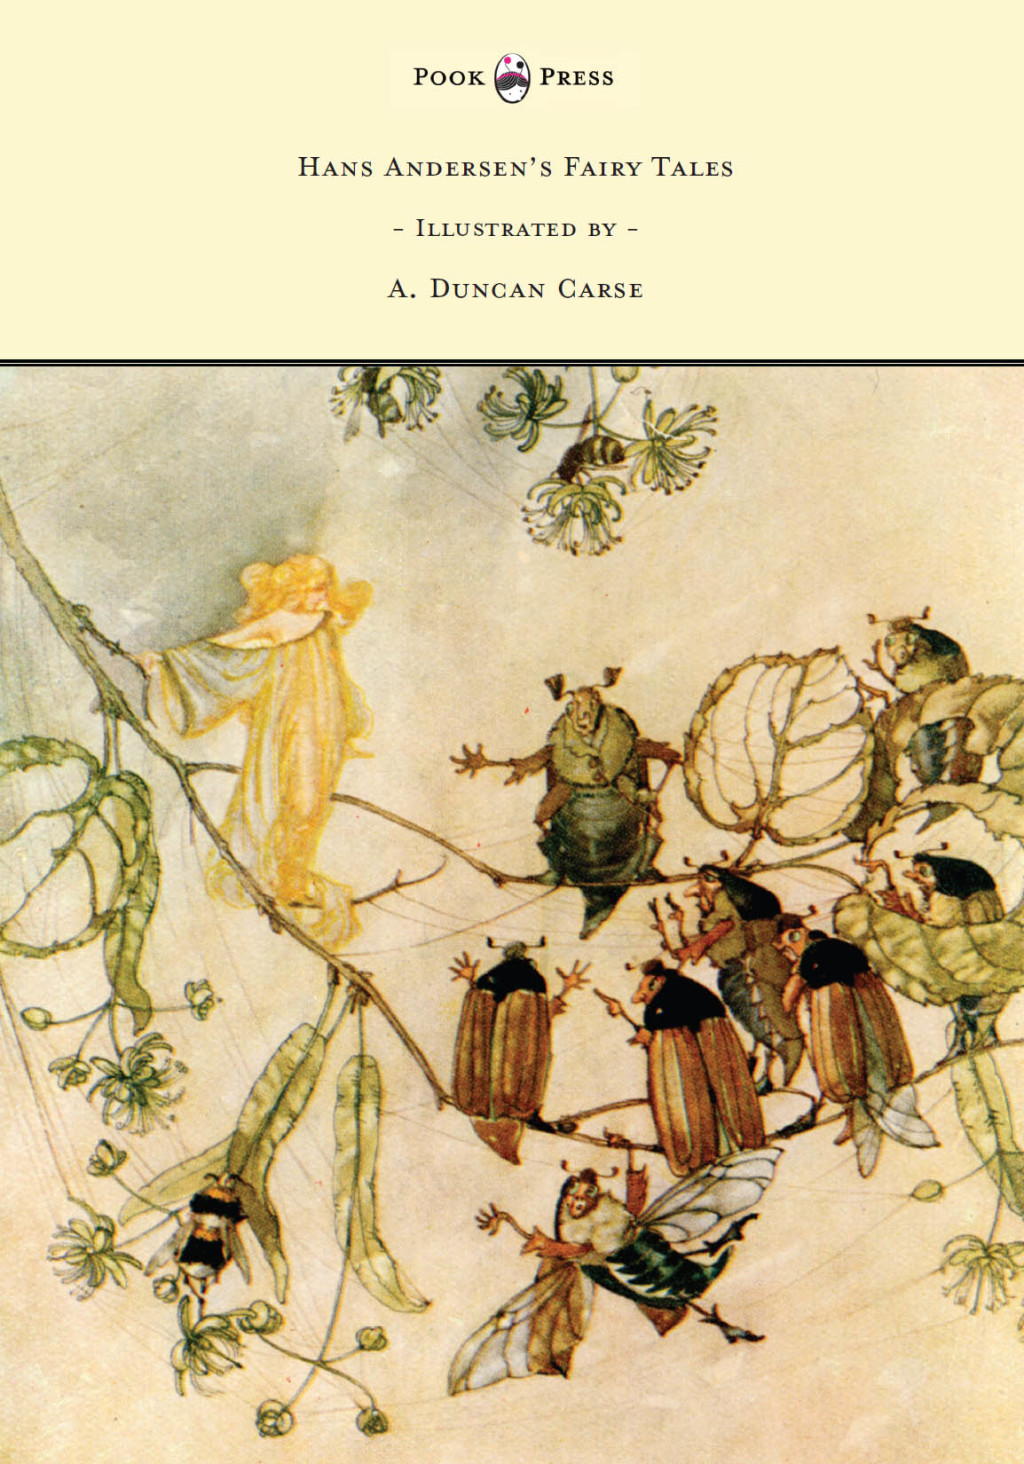 Hans Andersen's Fairy Tales - Illustrated by A. Duncan Carse (eBook) - Hans Christian Andersen,